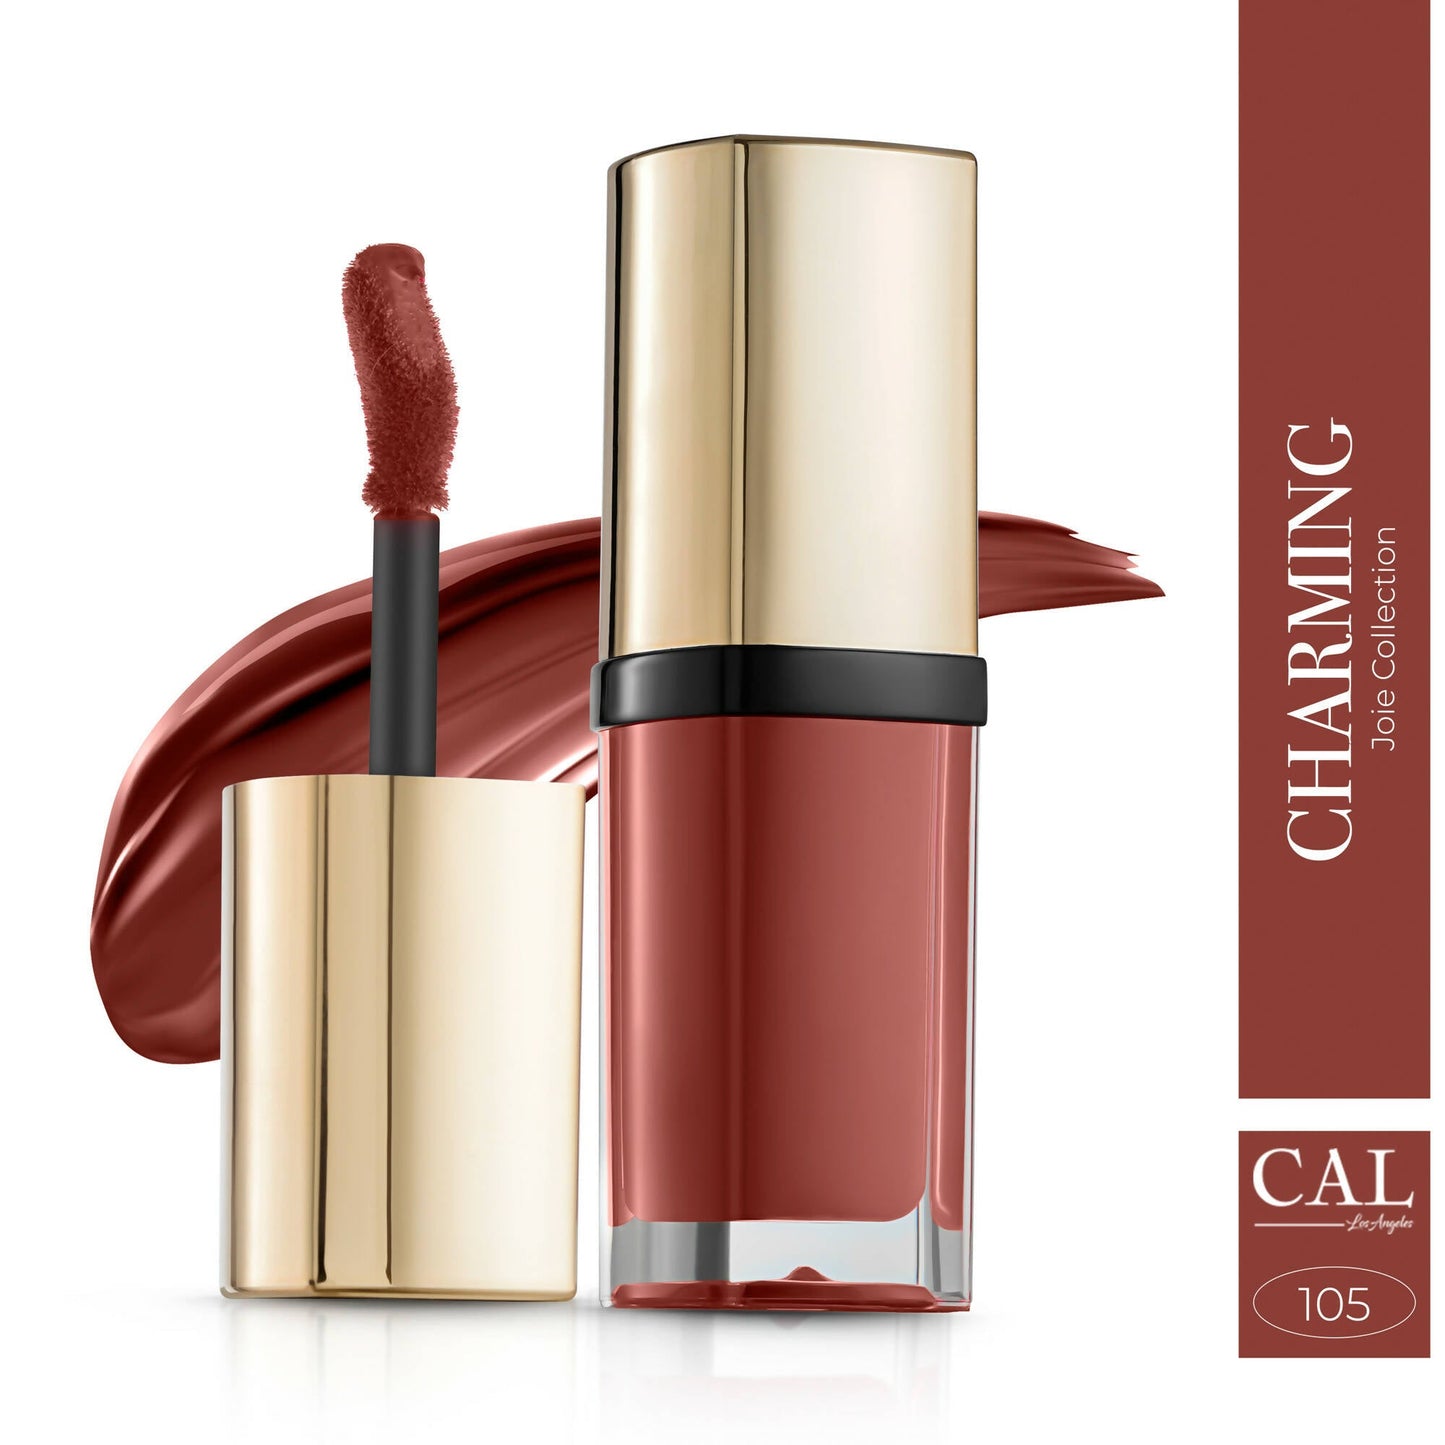 CAL Los Angeles Joie Collection Liquid Matte Brown Lipstick - Charming 105